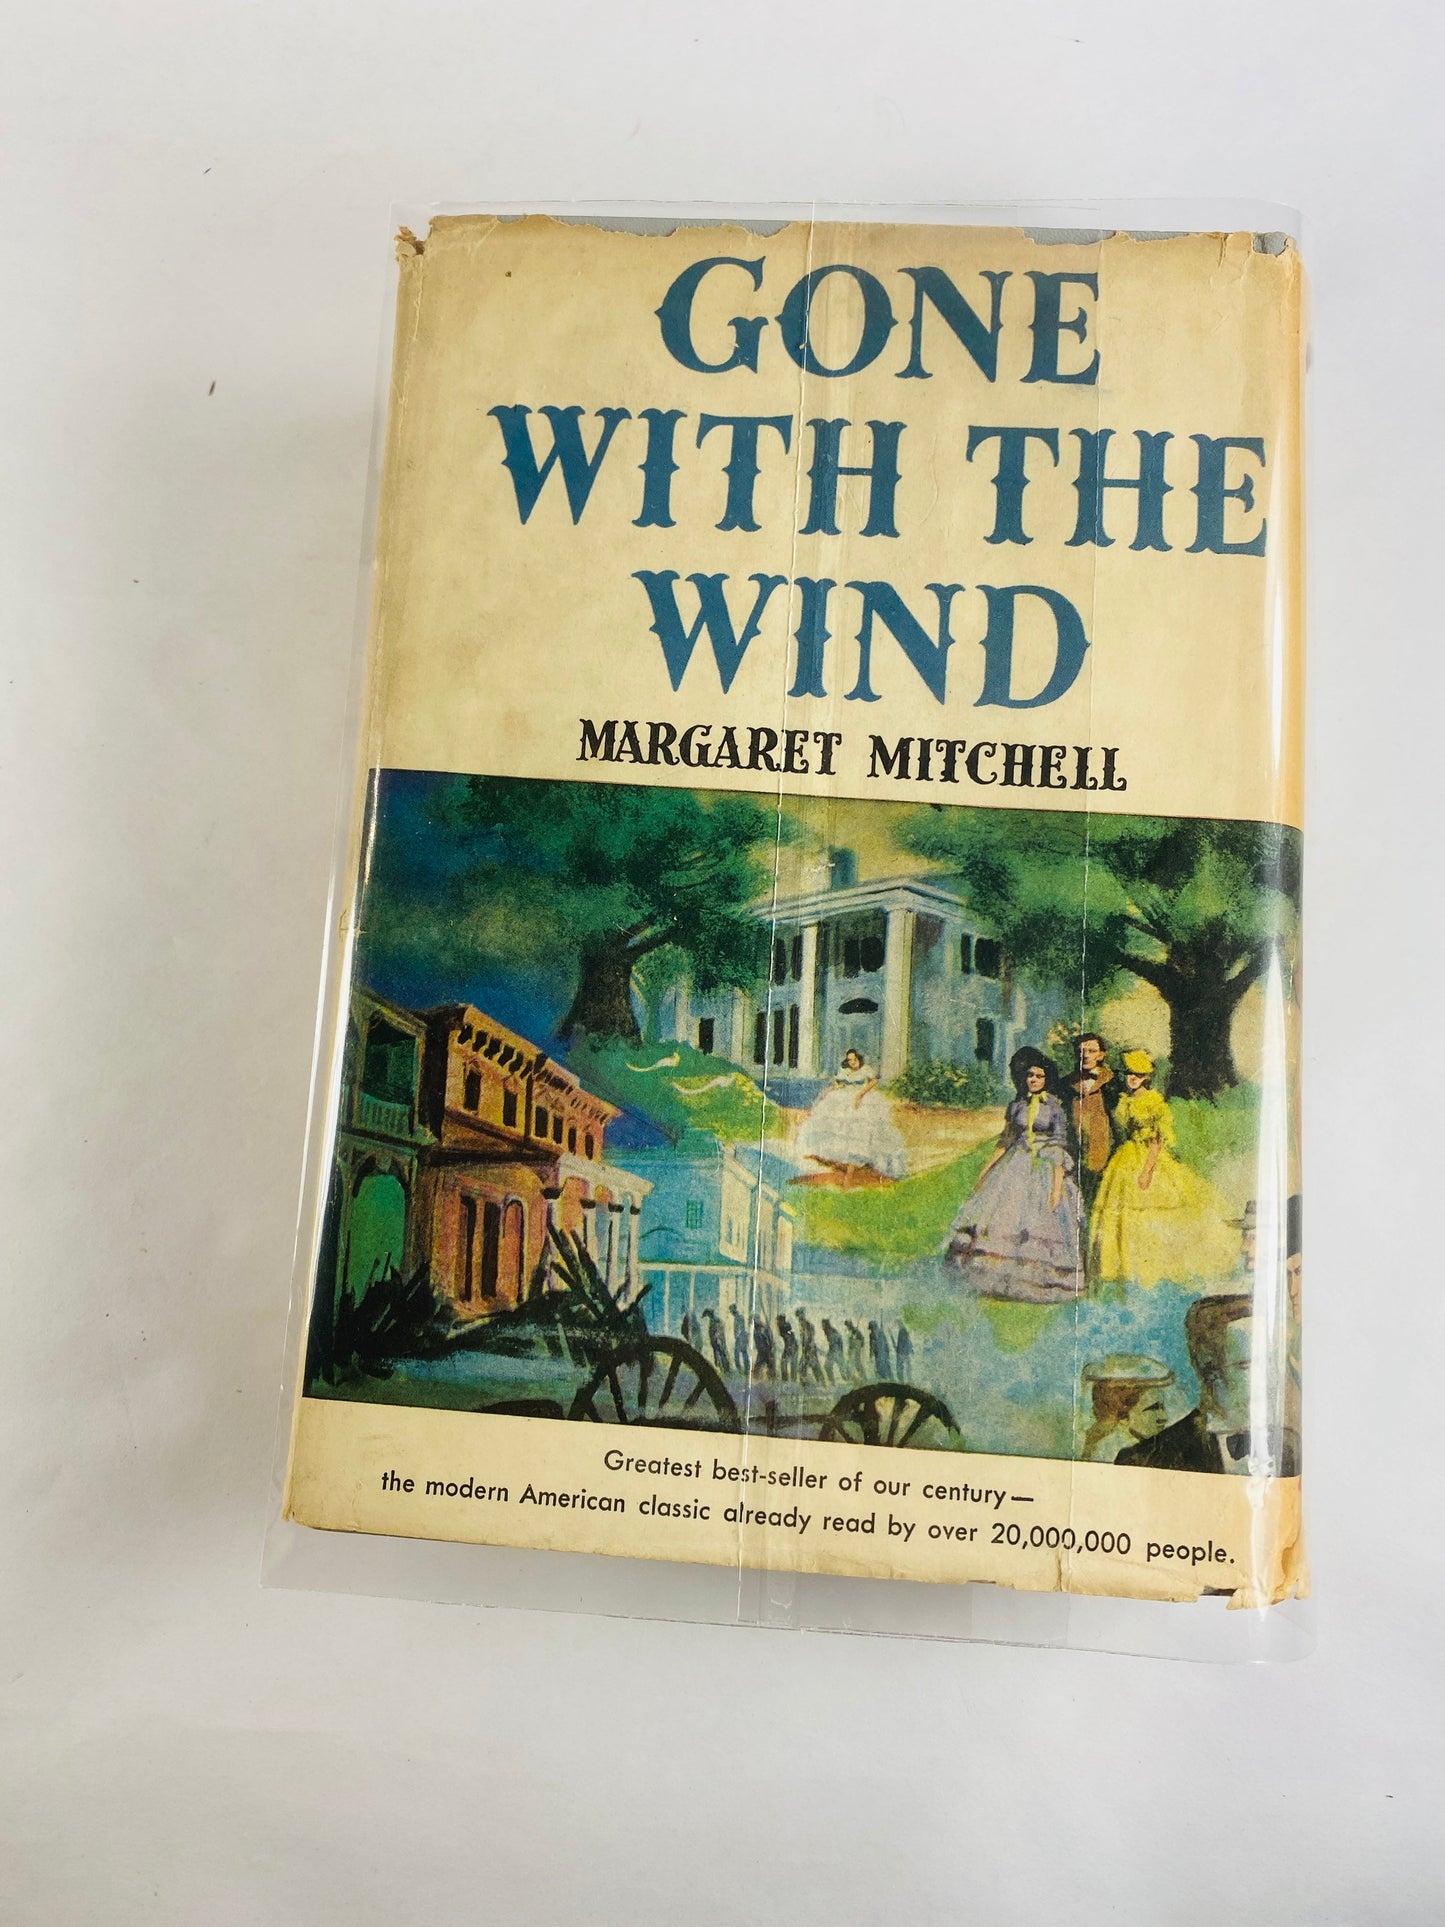 1964 Gone with the Wind by Margaret Mitchell Vintage book EARLY PRINTING deckeled pages Epic historical romance Scarlett O'hara decor BCE